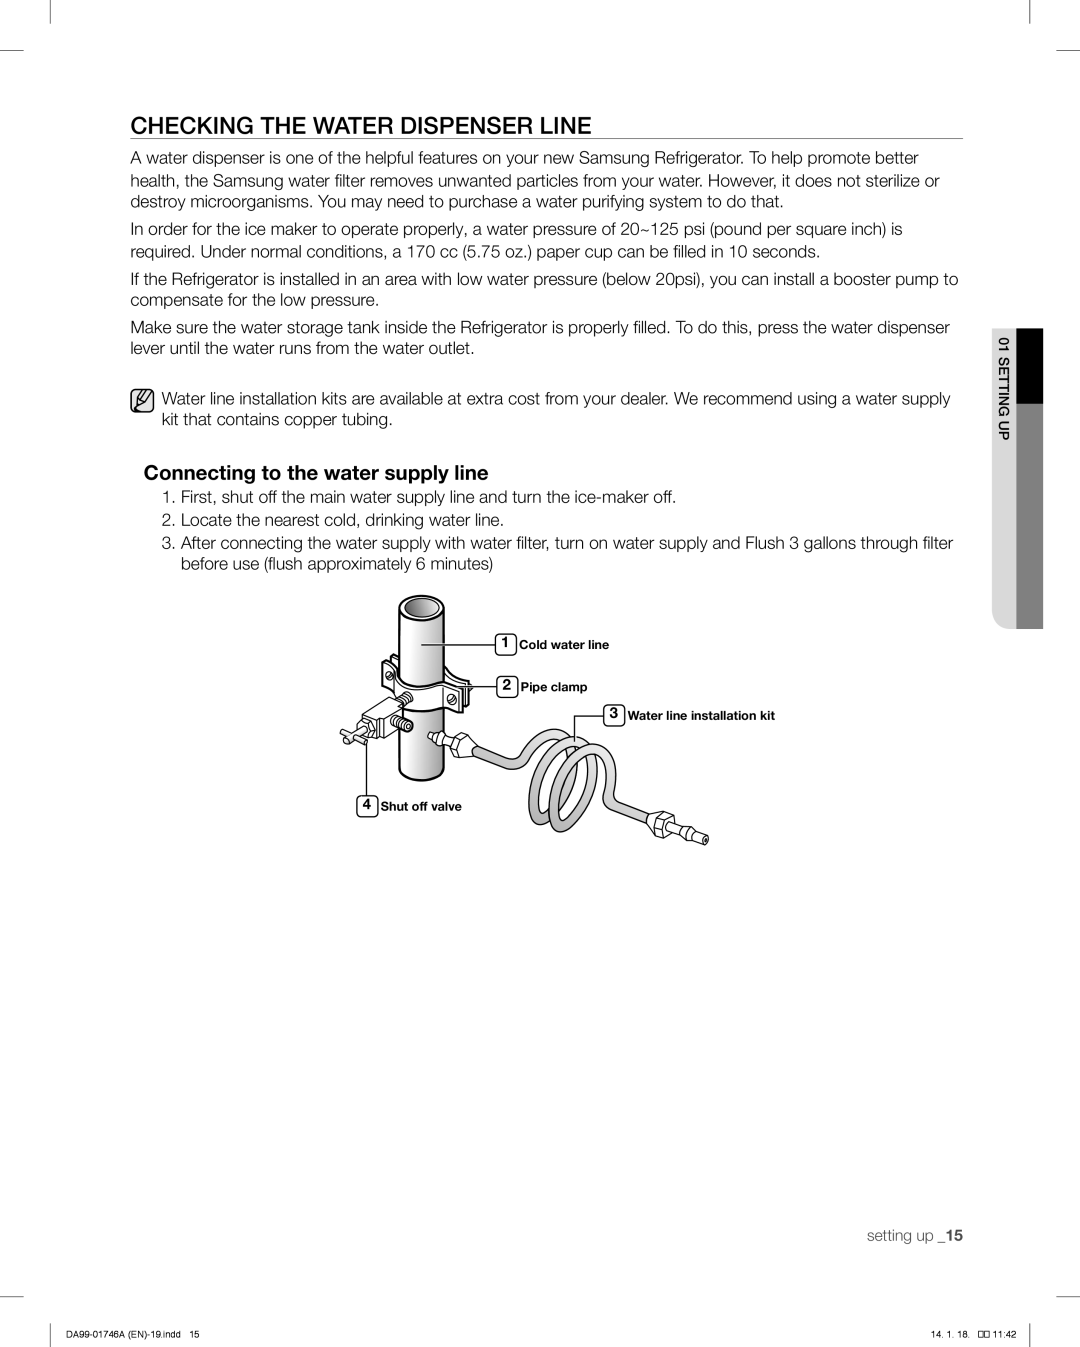 Samsung RSG257AA user manual Checking The Water Dispenser Line, Connecting to the water supply line 